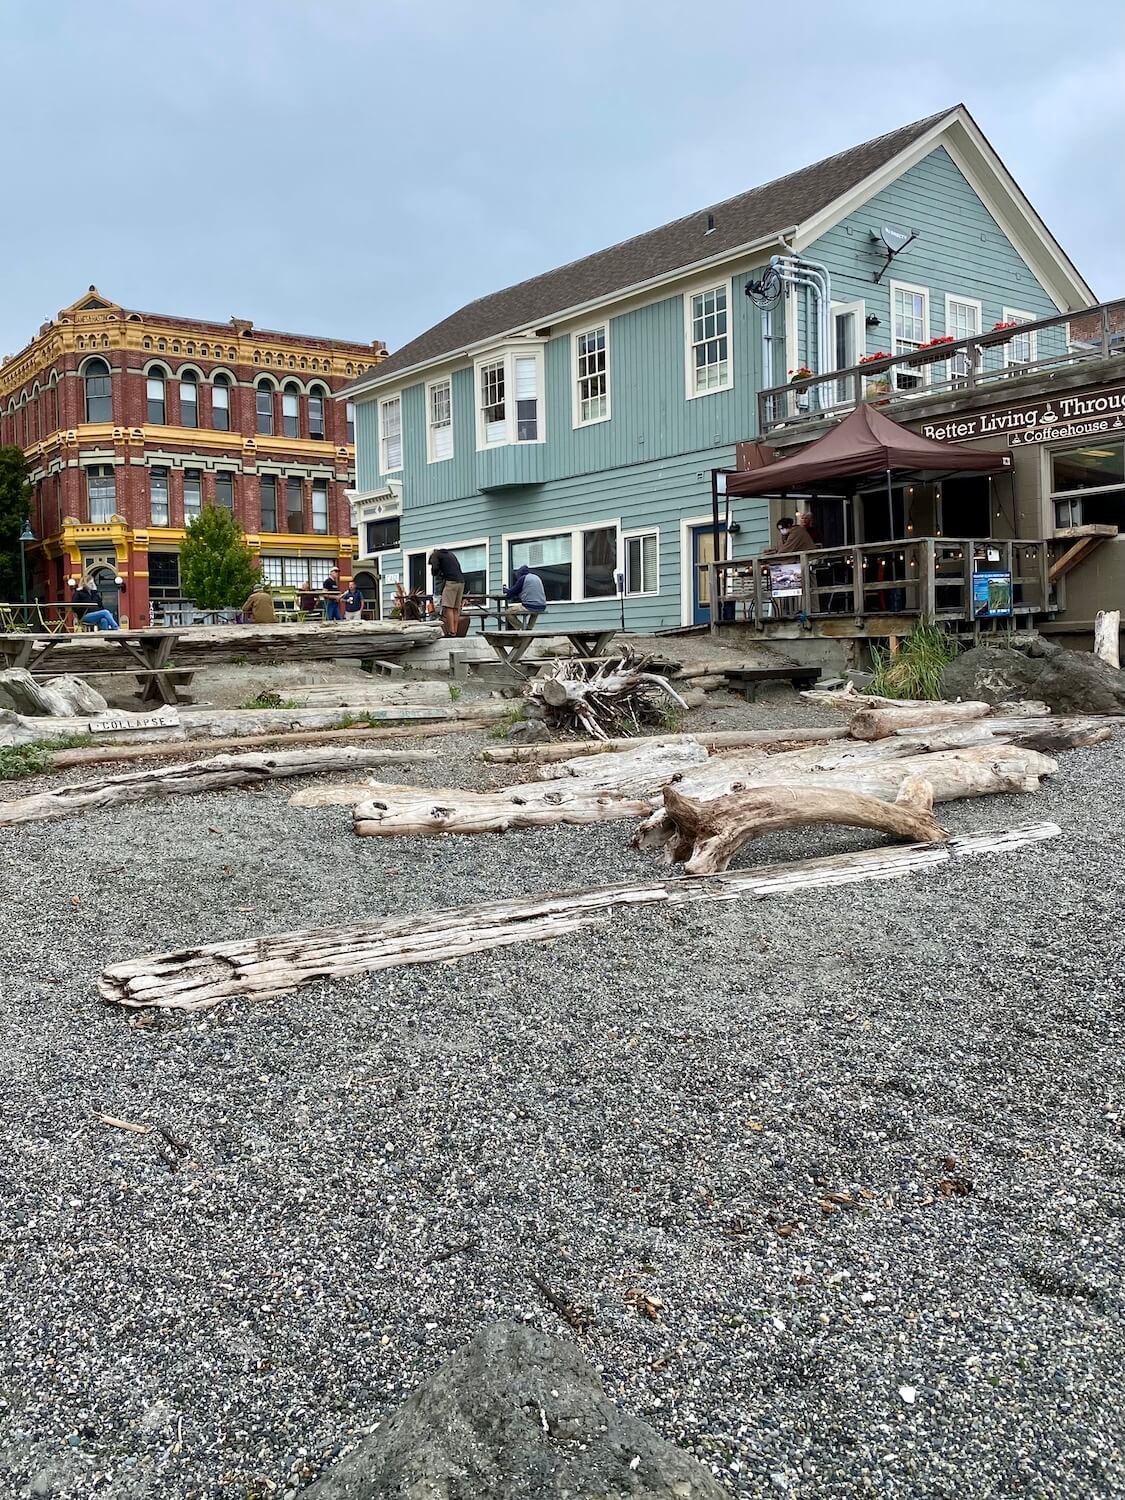 A pebble beach leads up to driftwood that make convenient benches for patrons getting coffee at Better Living through Coffee, a shop right on the beach. In the background you can see an ornate red brick building with bright yellow trim under gray cloudy skies.